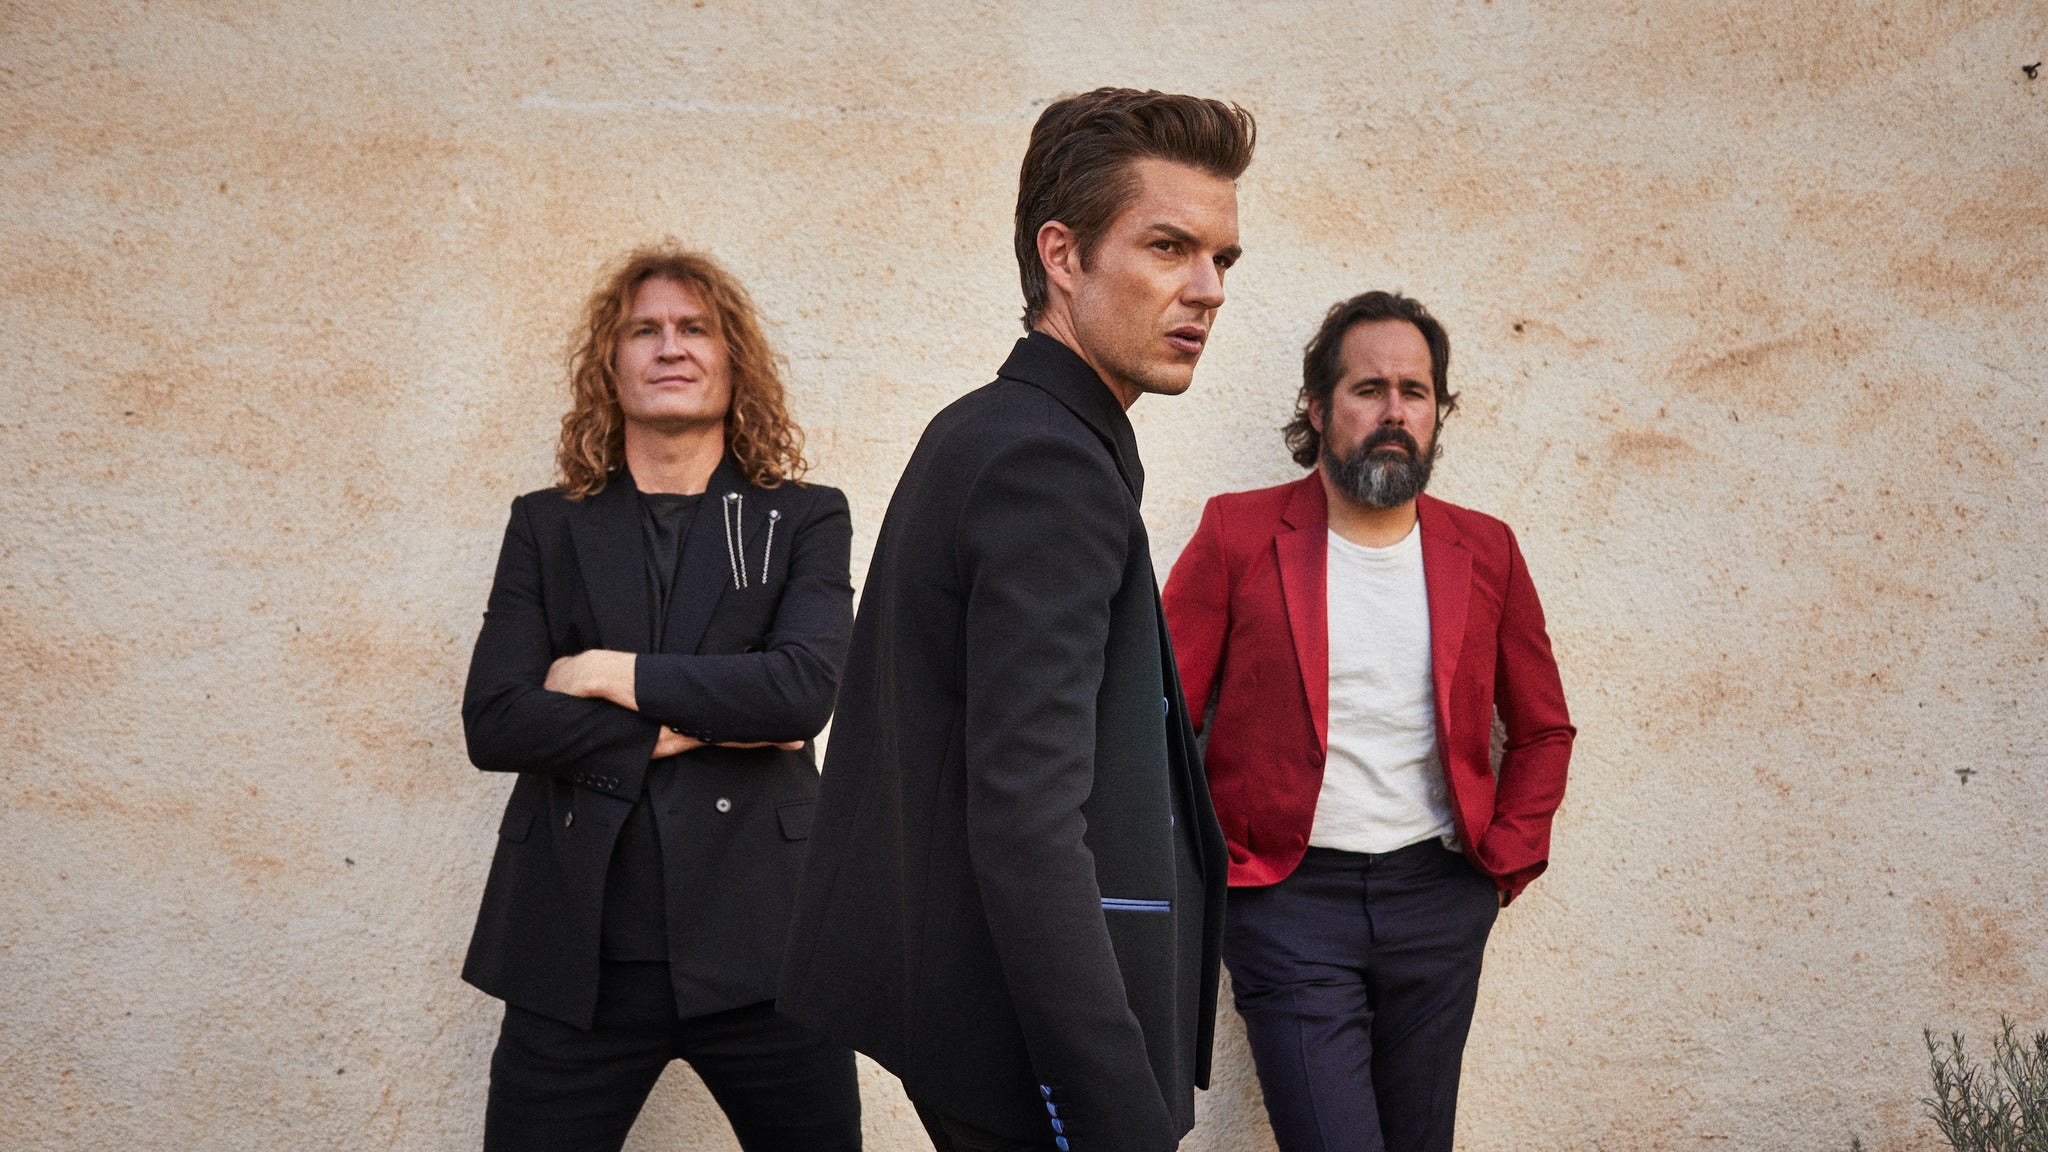 Image used with permission from Ticketmaster | a day on the green - The Killers (Concert & Dining) tickets